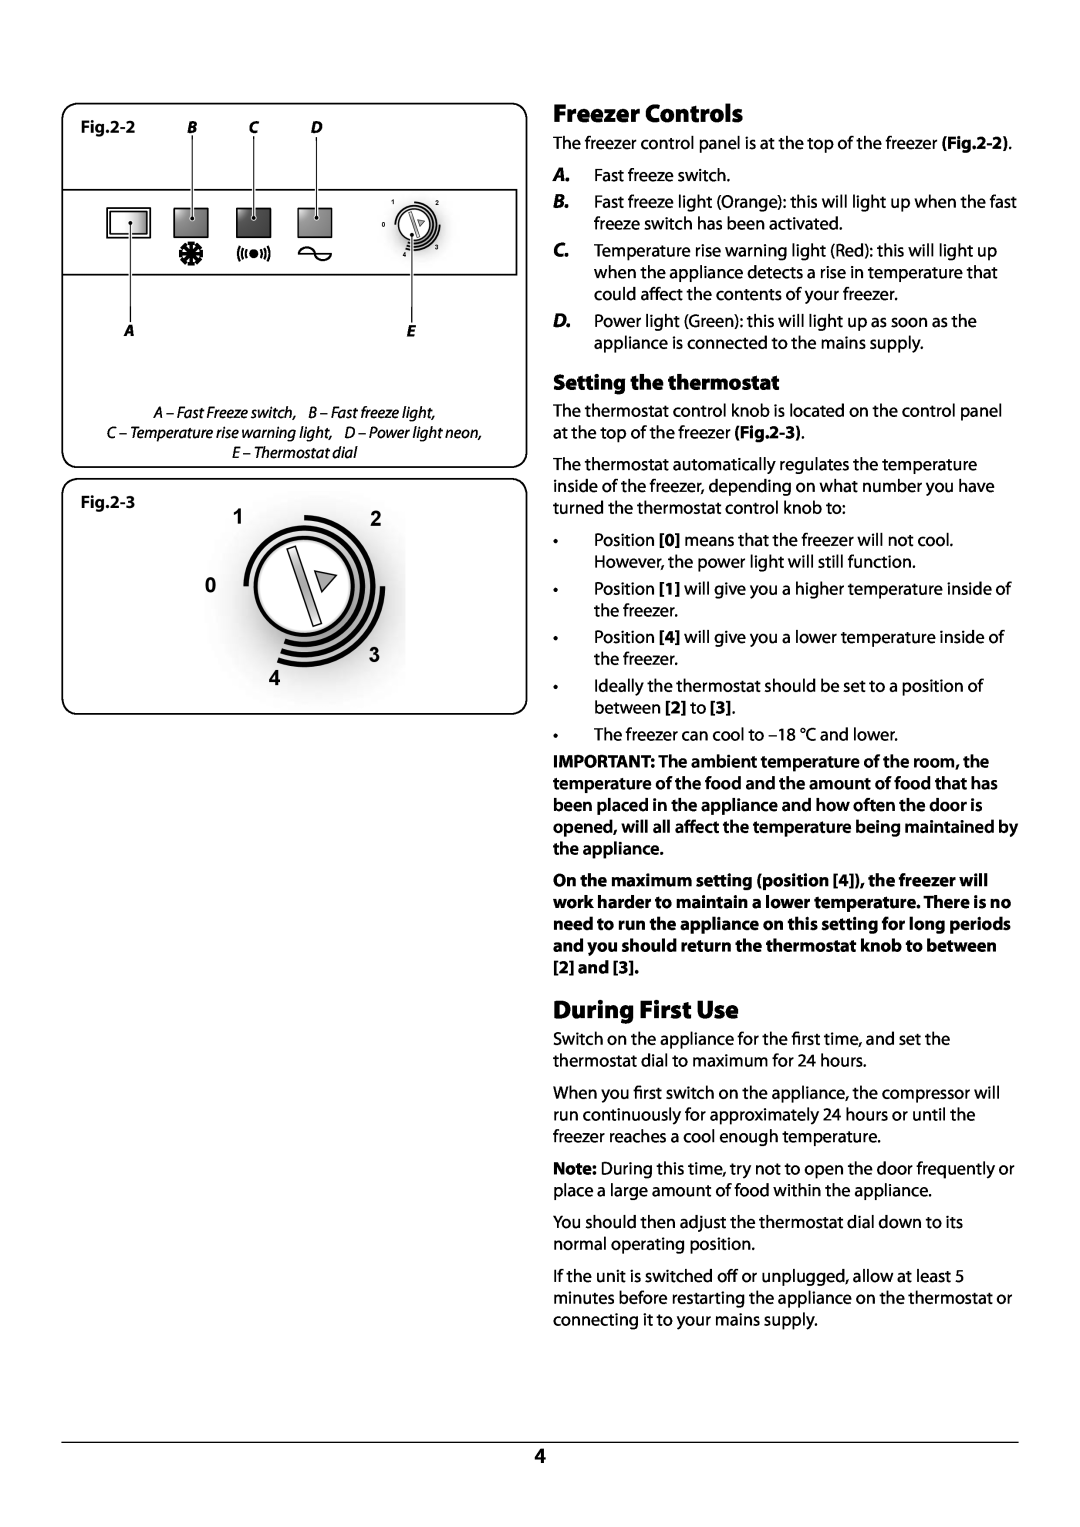 Rangemaster U110120 - 01A manual Freezer Controls, During First Use, Setting the thermostat, 3 